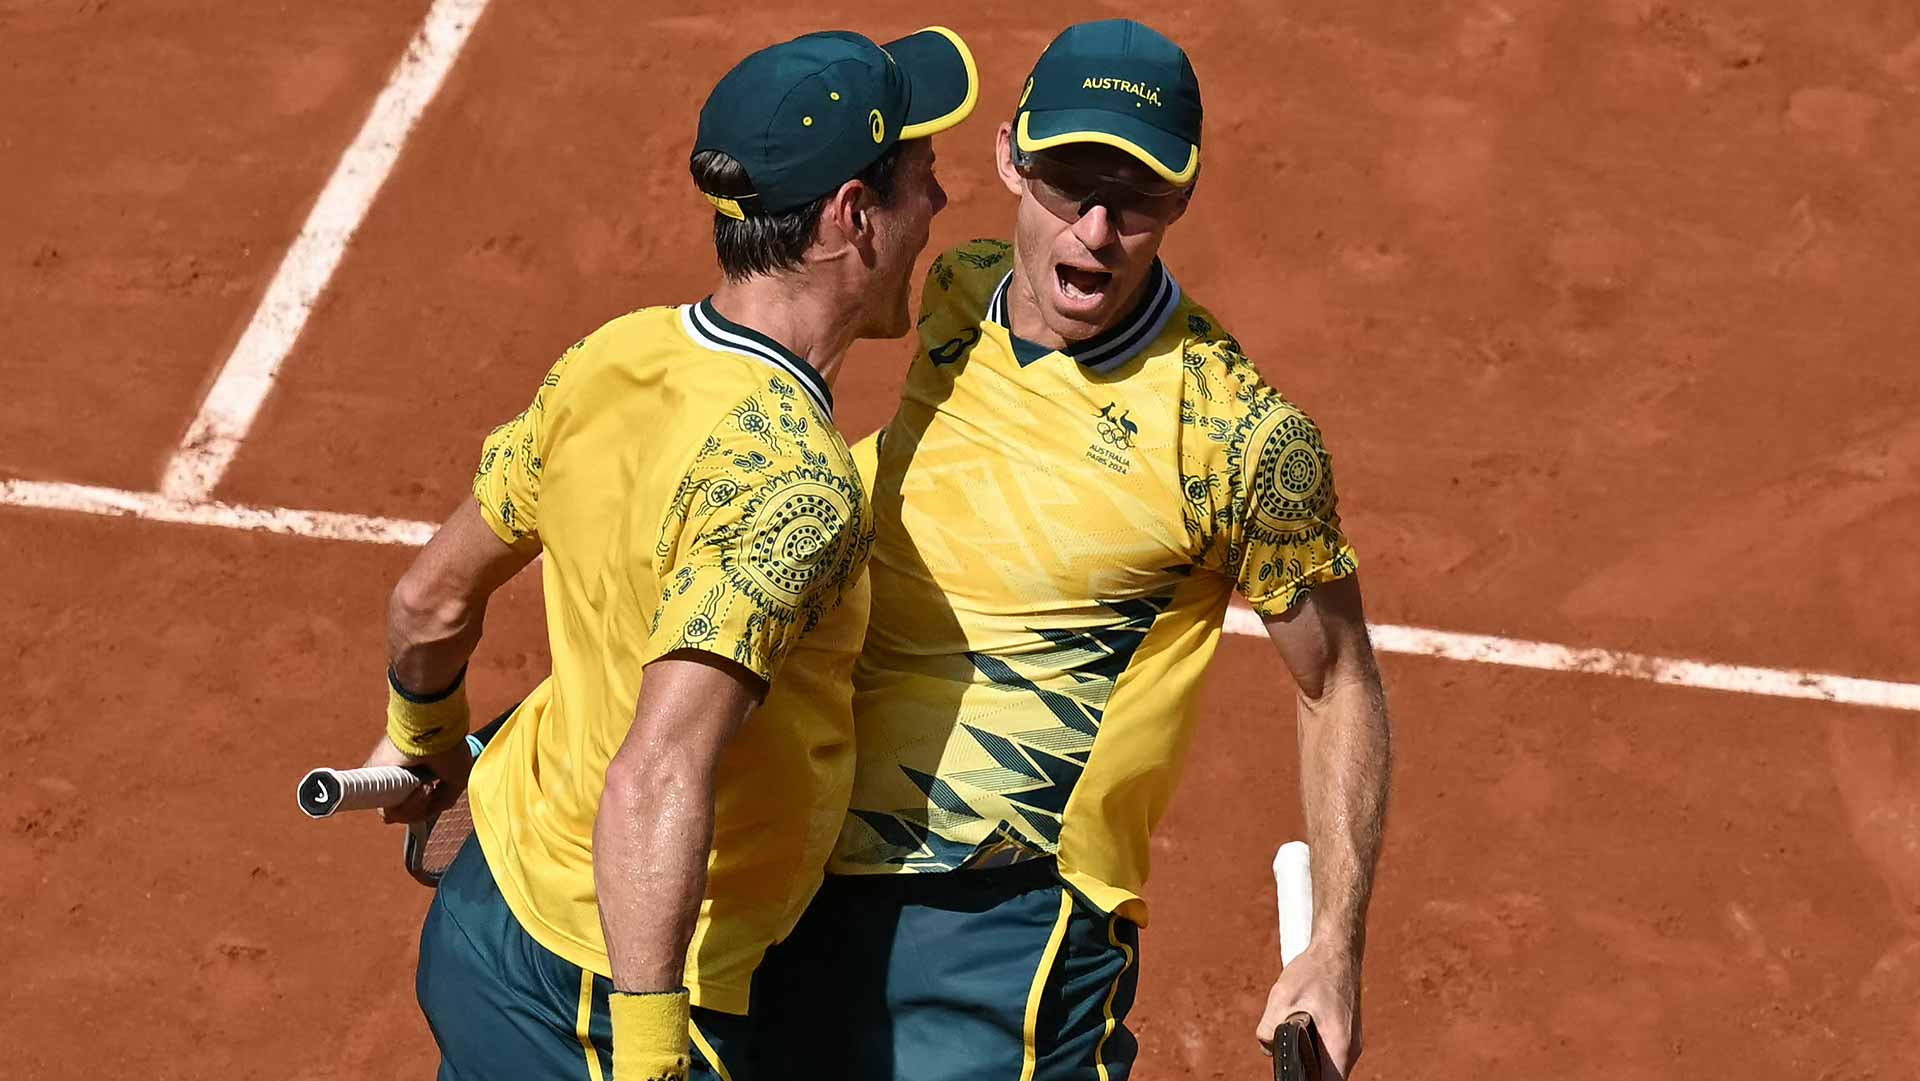 Ebden & Peers beat Fritz & Paul to reach Olympic doubles final 